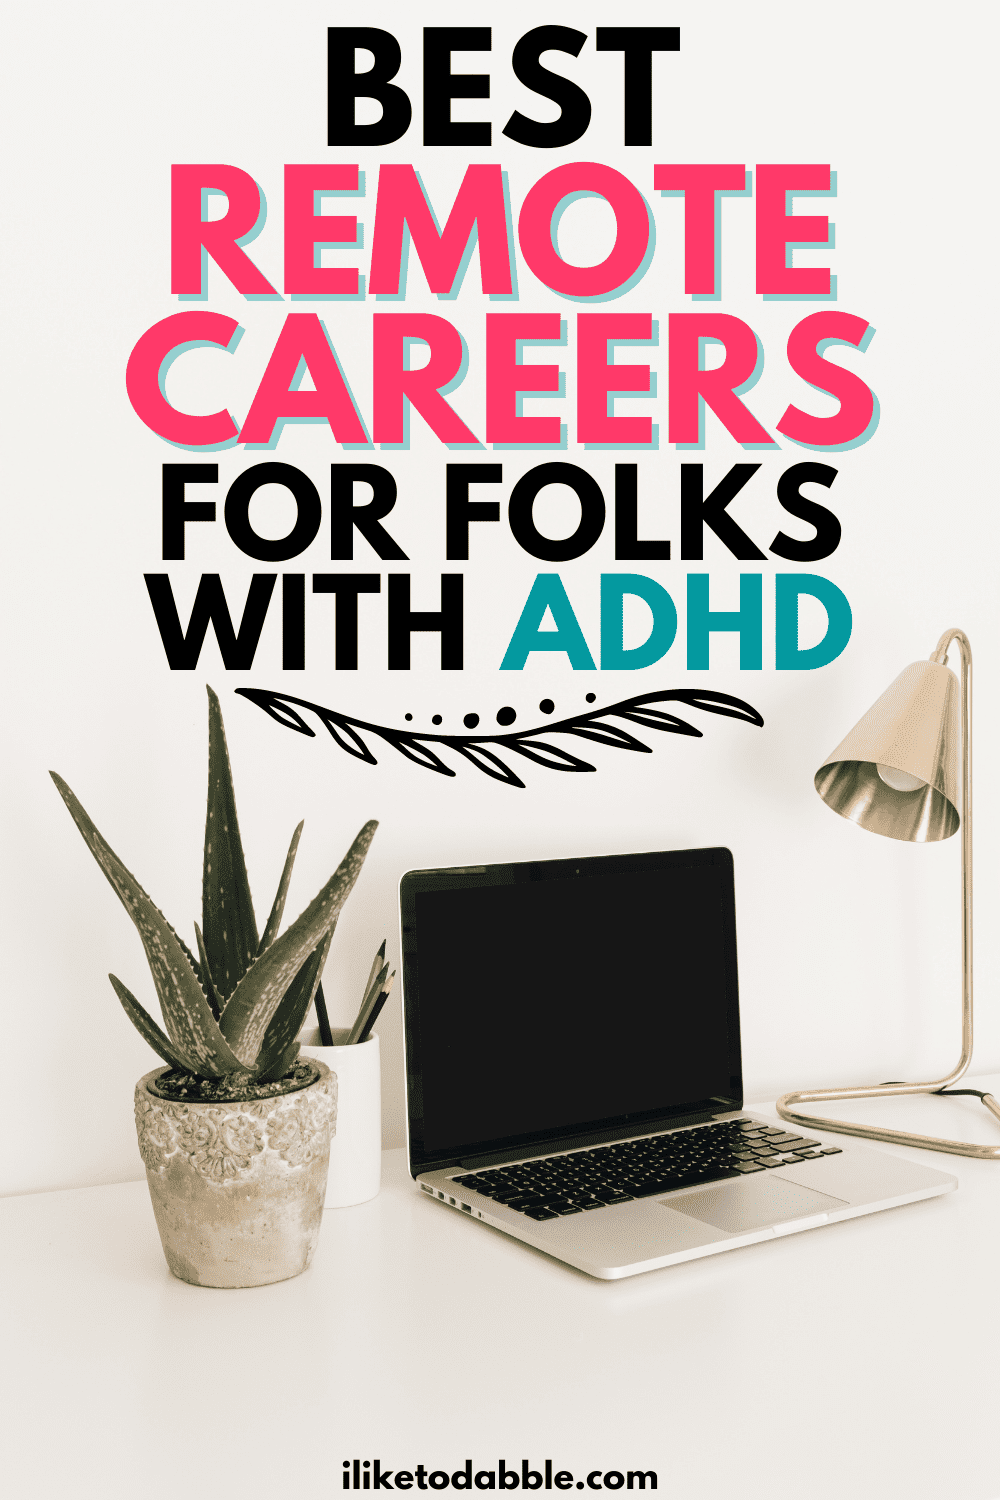 best remote careers for adhd pinable image with a home office desk setup and title text overlay